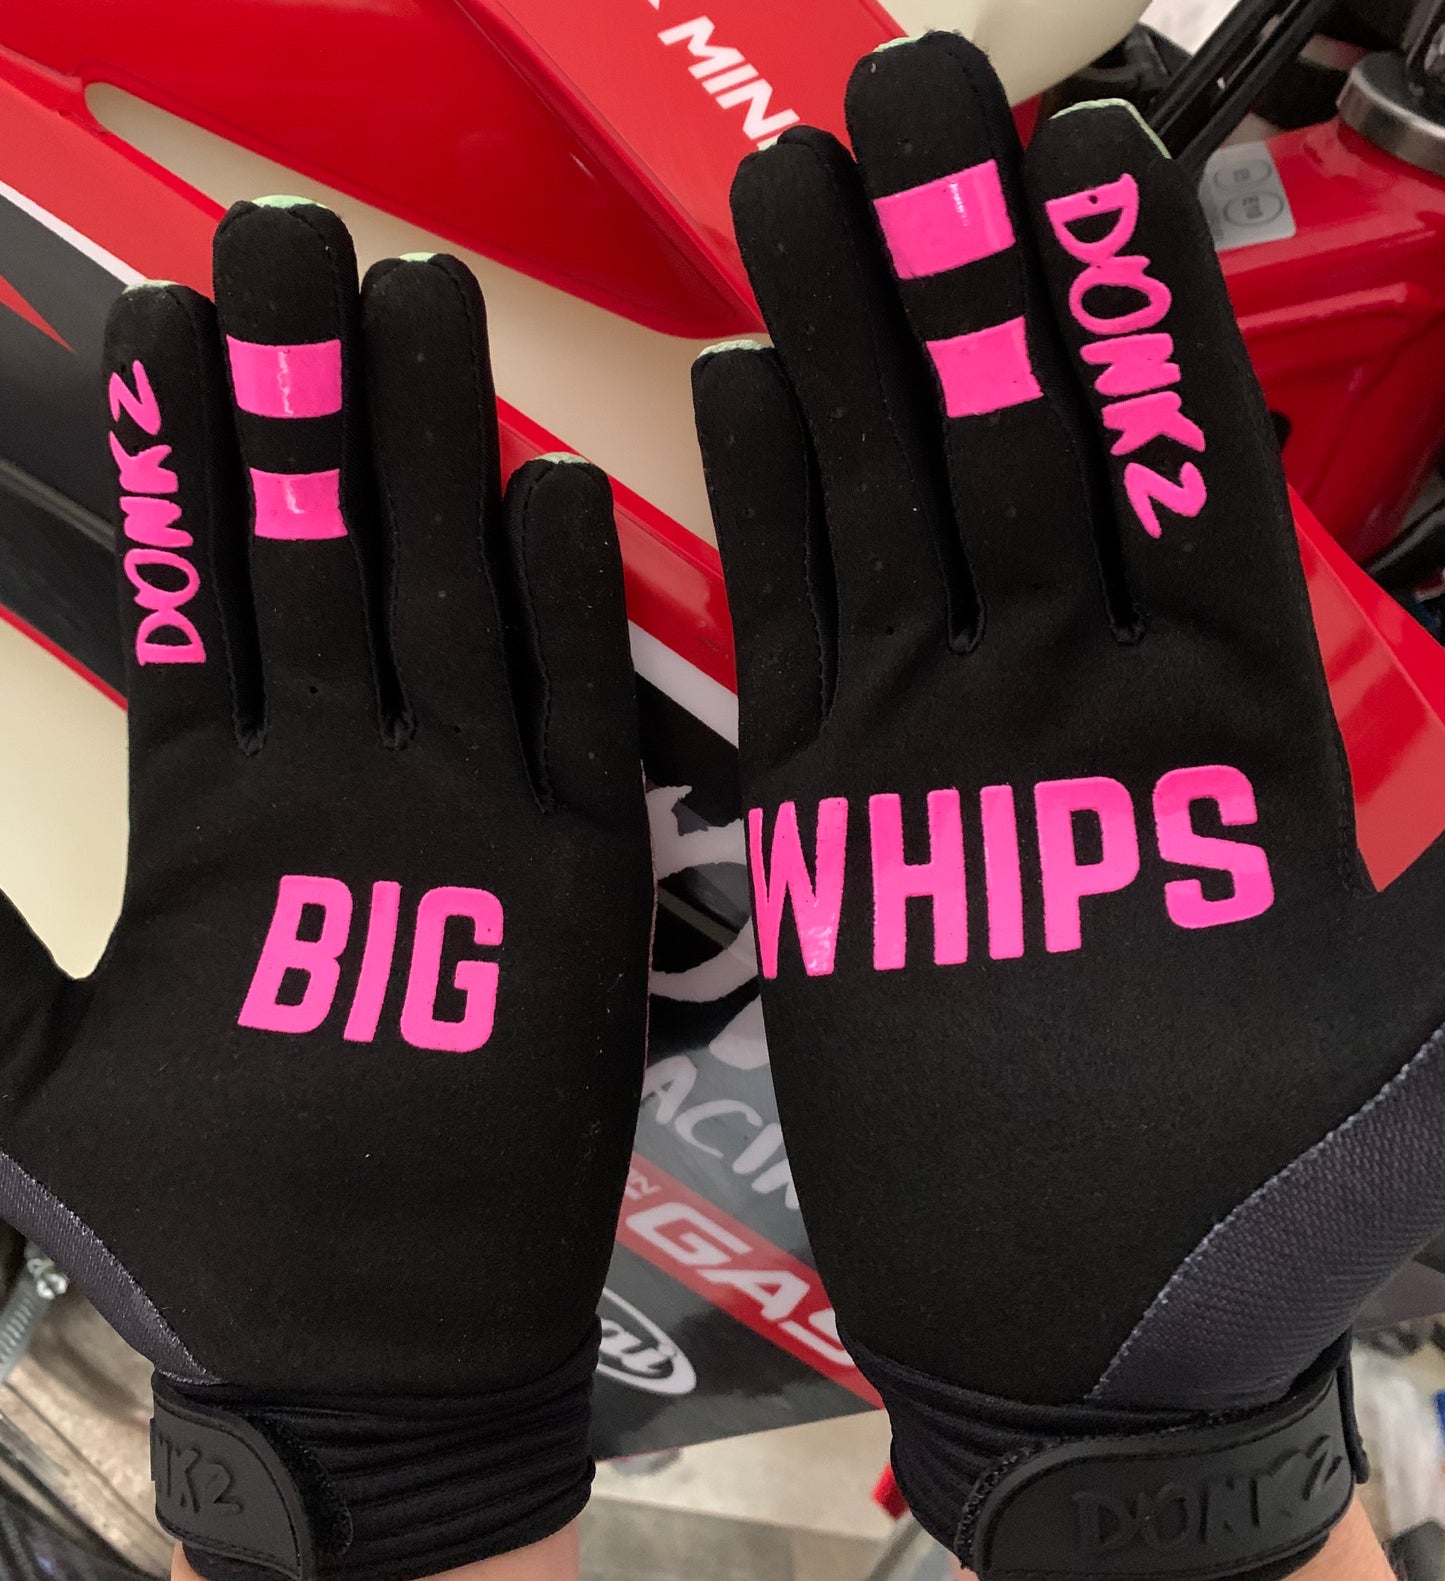 BIG WHIPS PINK